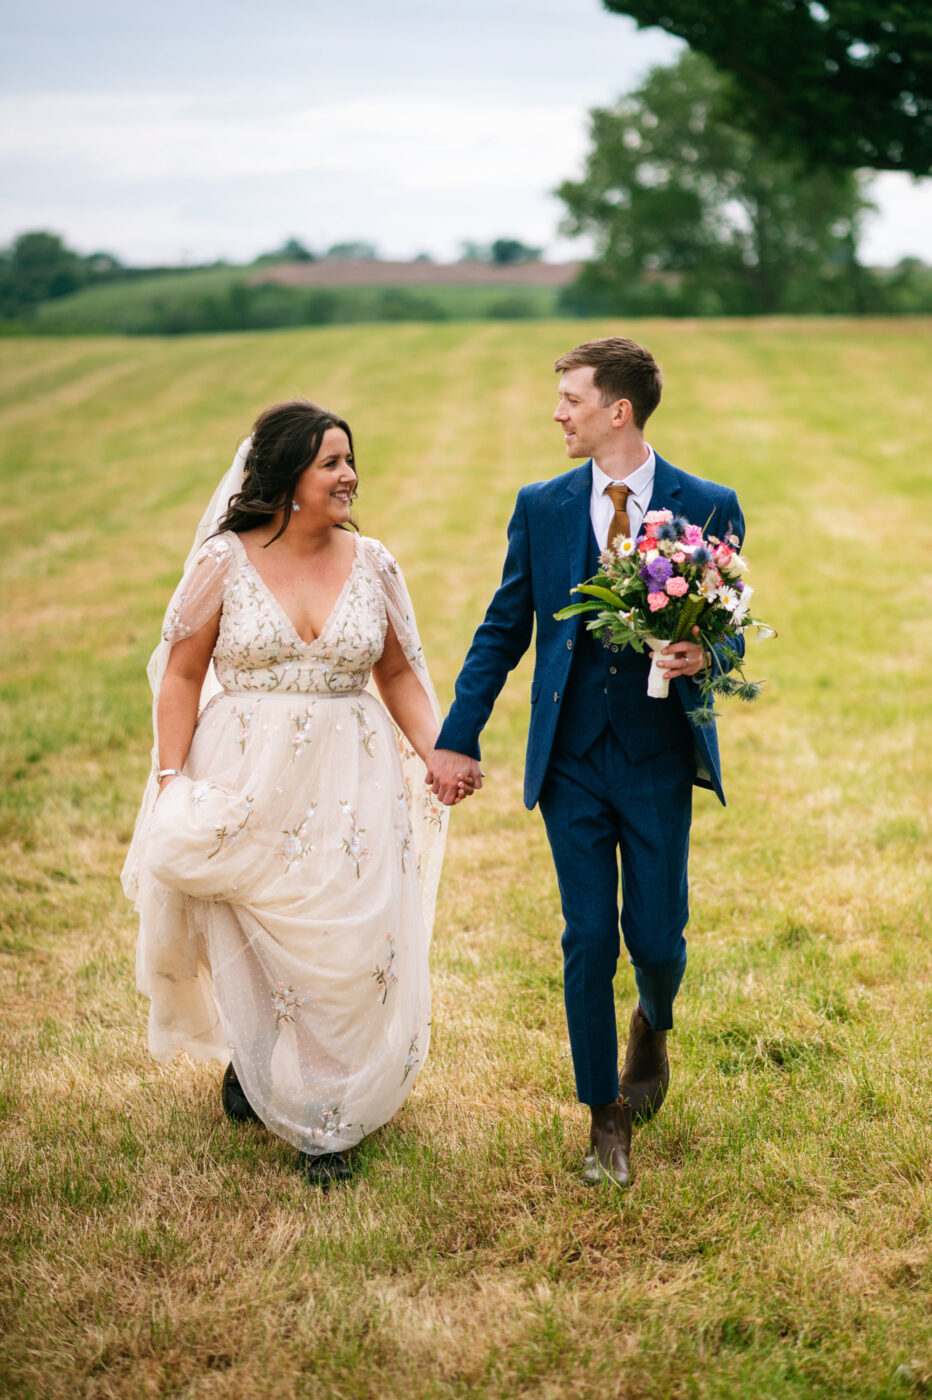 newlyweds walking through a field together with the groom holding the bouquet